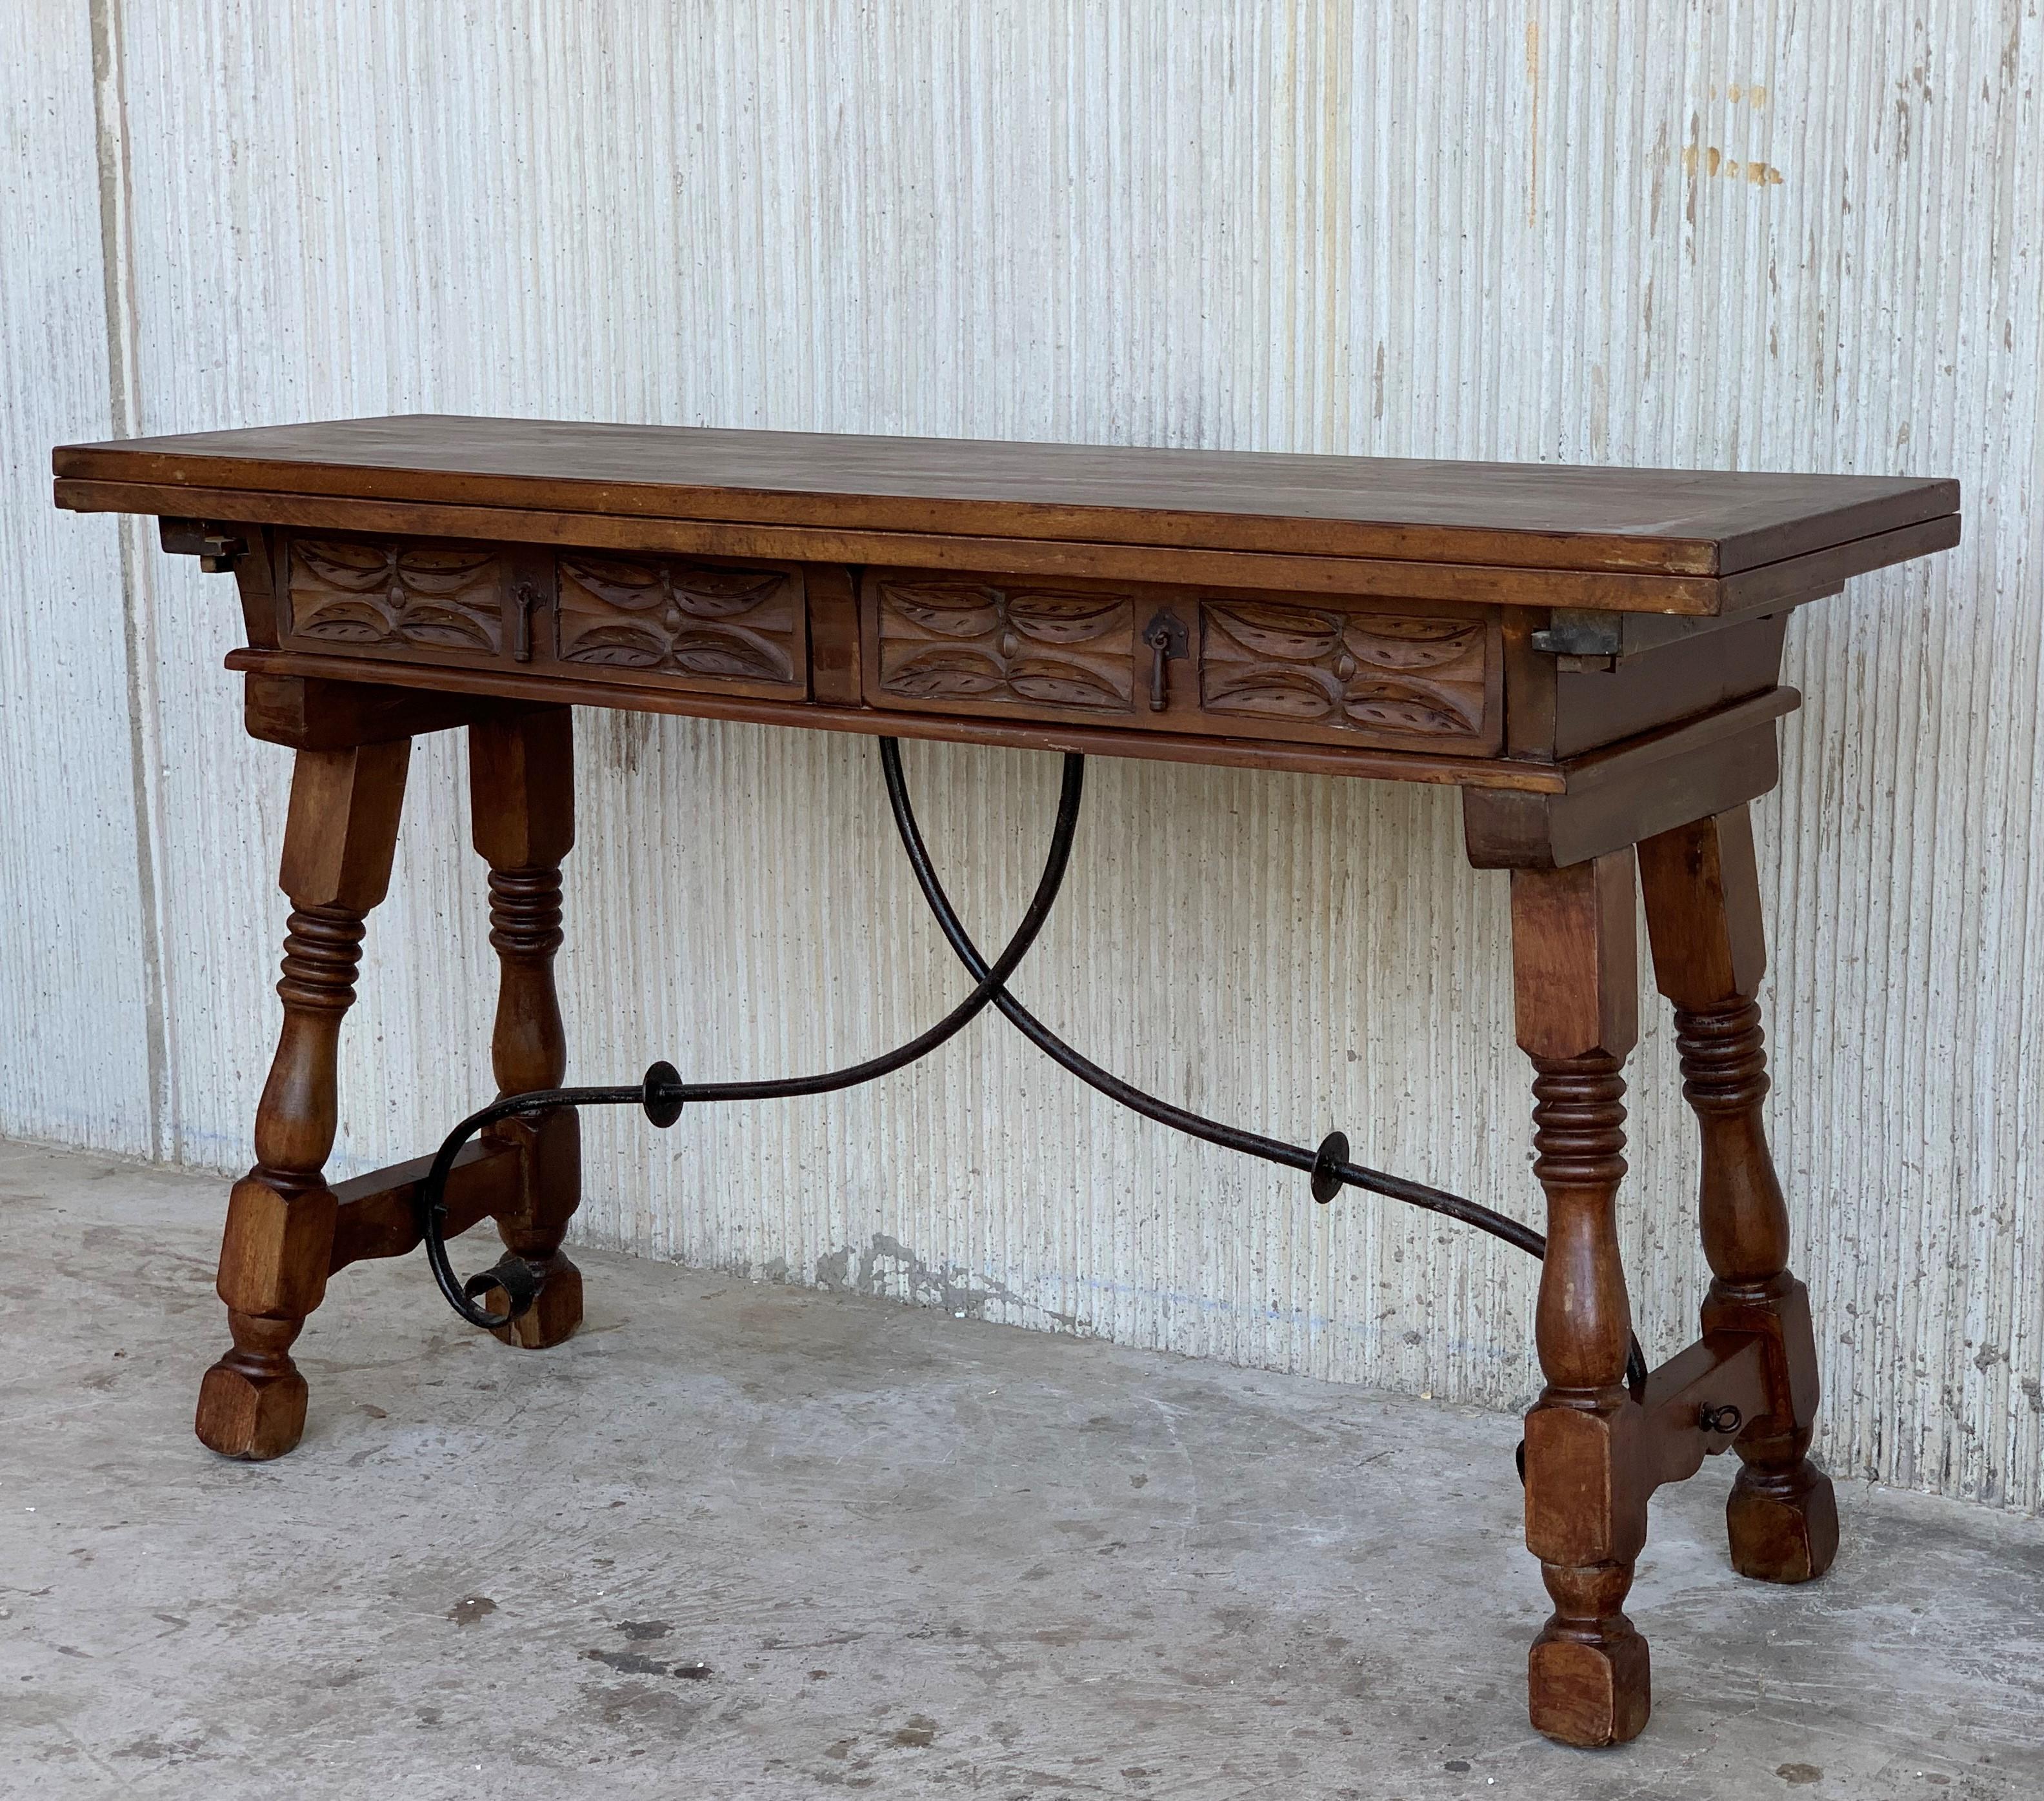 20th century Spanish console fold out farm table
Works as both a dining table and console.
Extra measures:
15.75